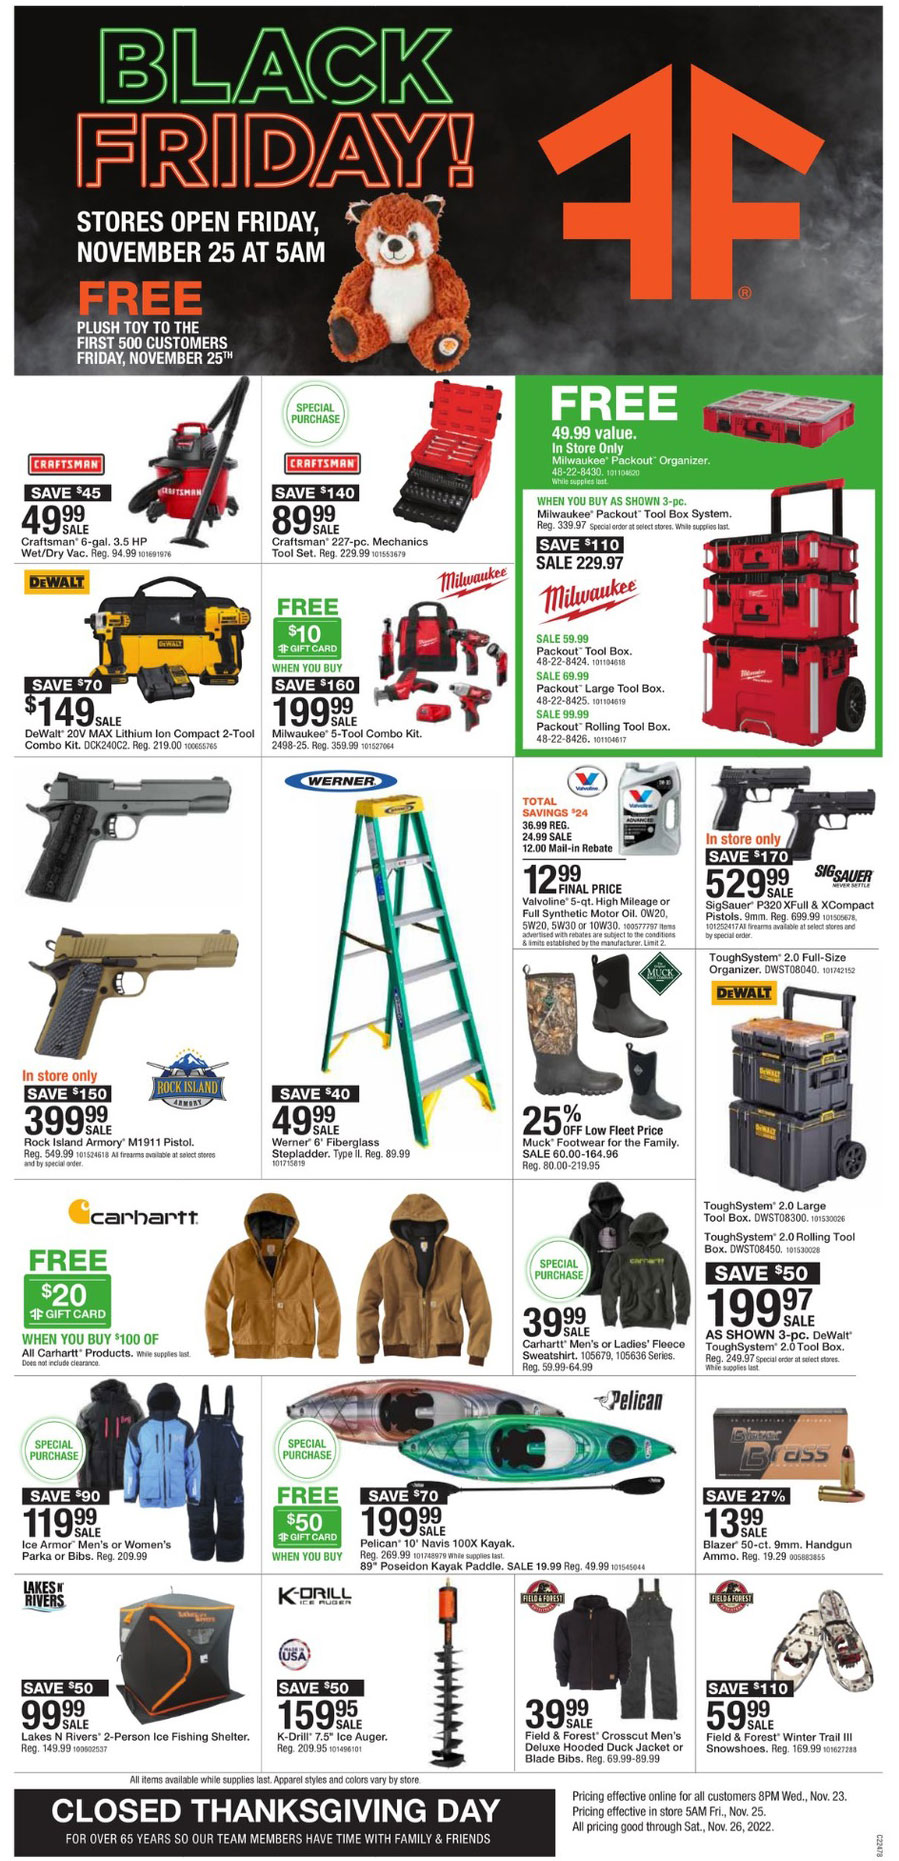 Mills Fleet Farm Black Friday 2022 Ad, Deals, and Sale Info - What Time Colorado Mills Hours On Black Friday